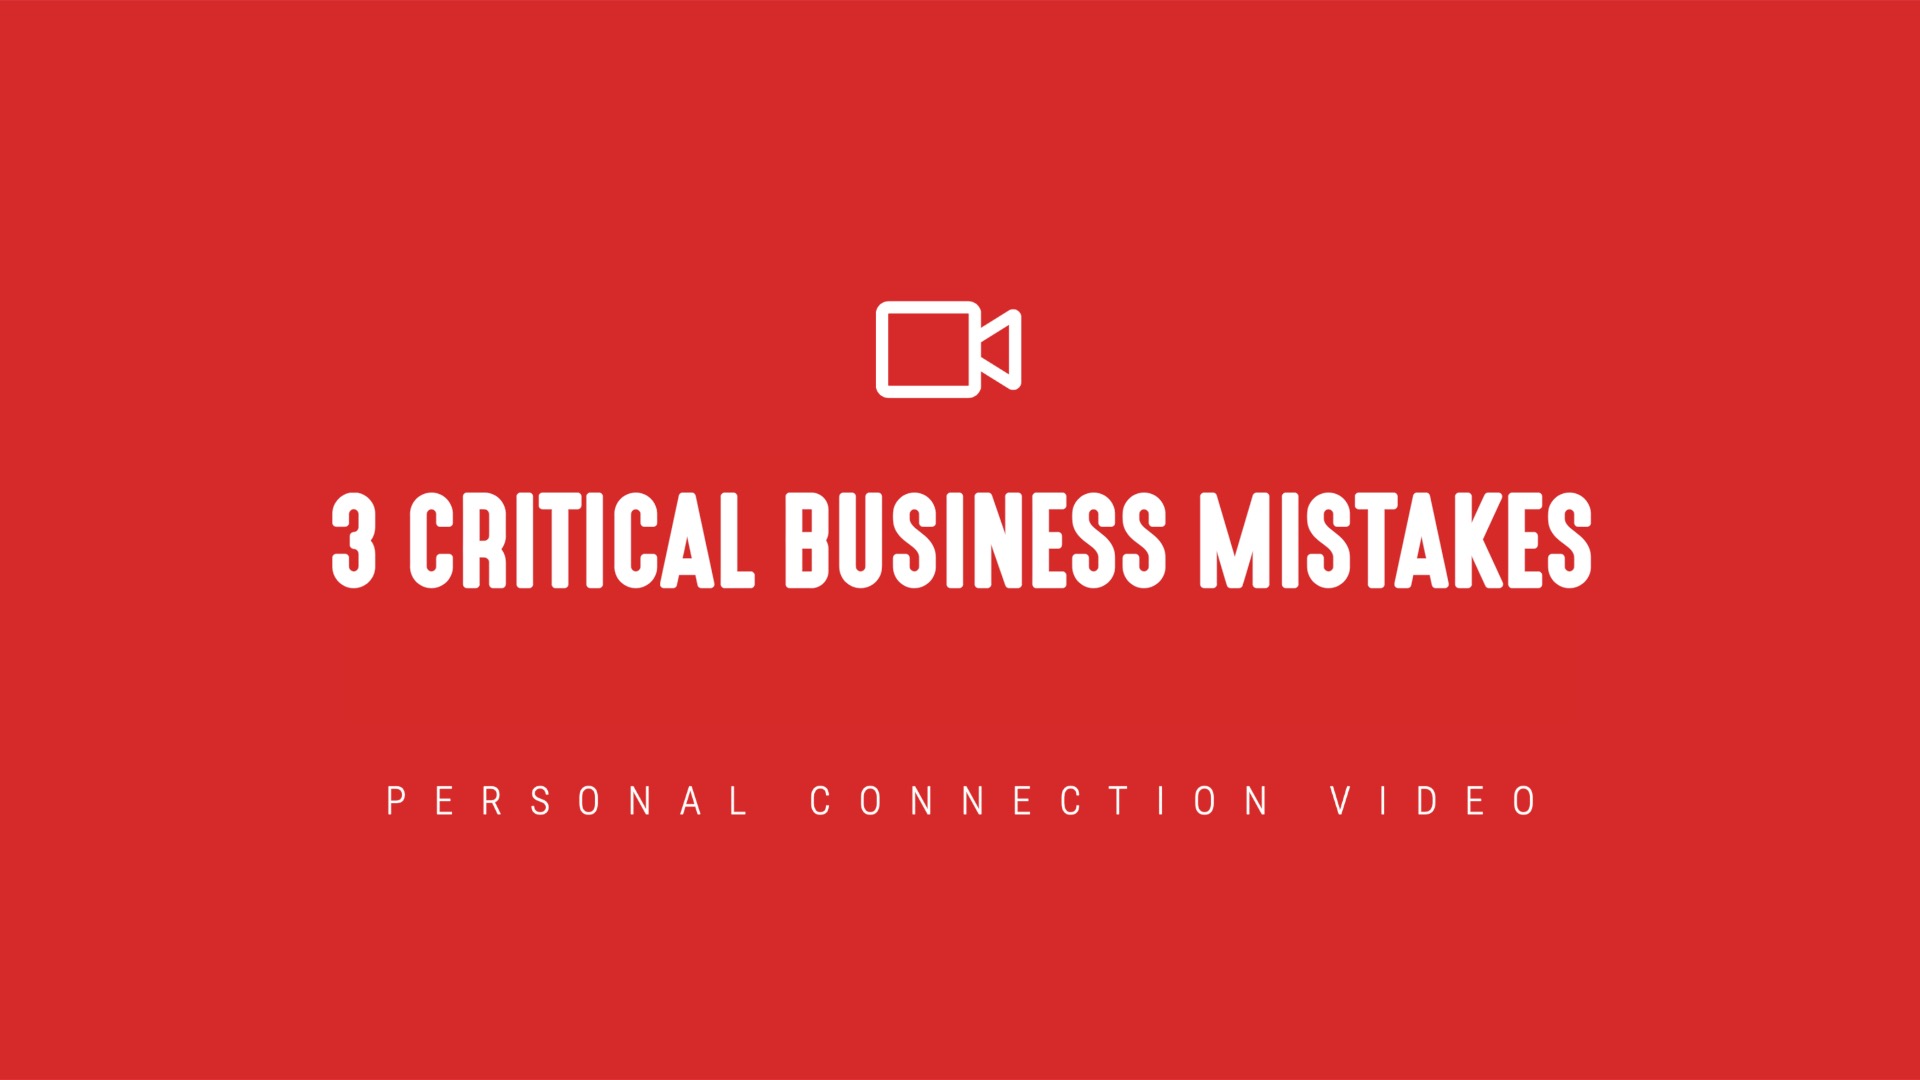 [NEW] Personal Connection Video | 3 Critical Business Mistakes